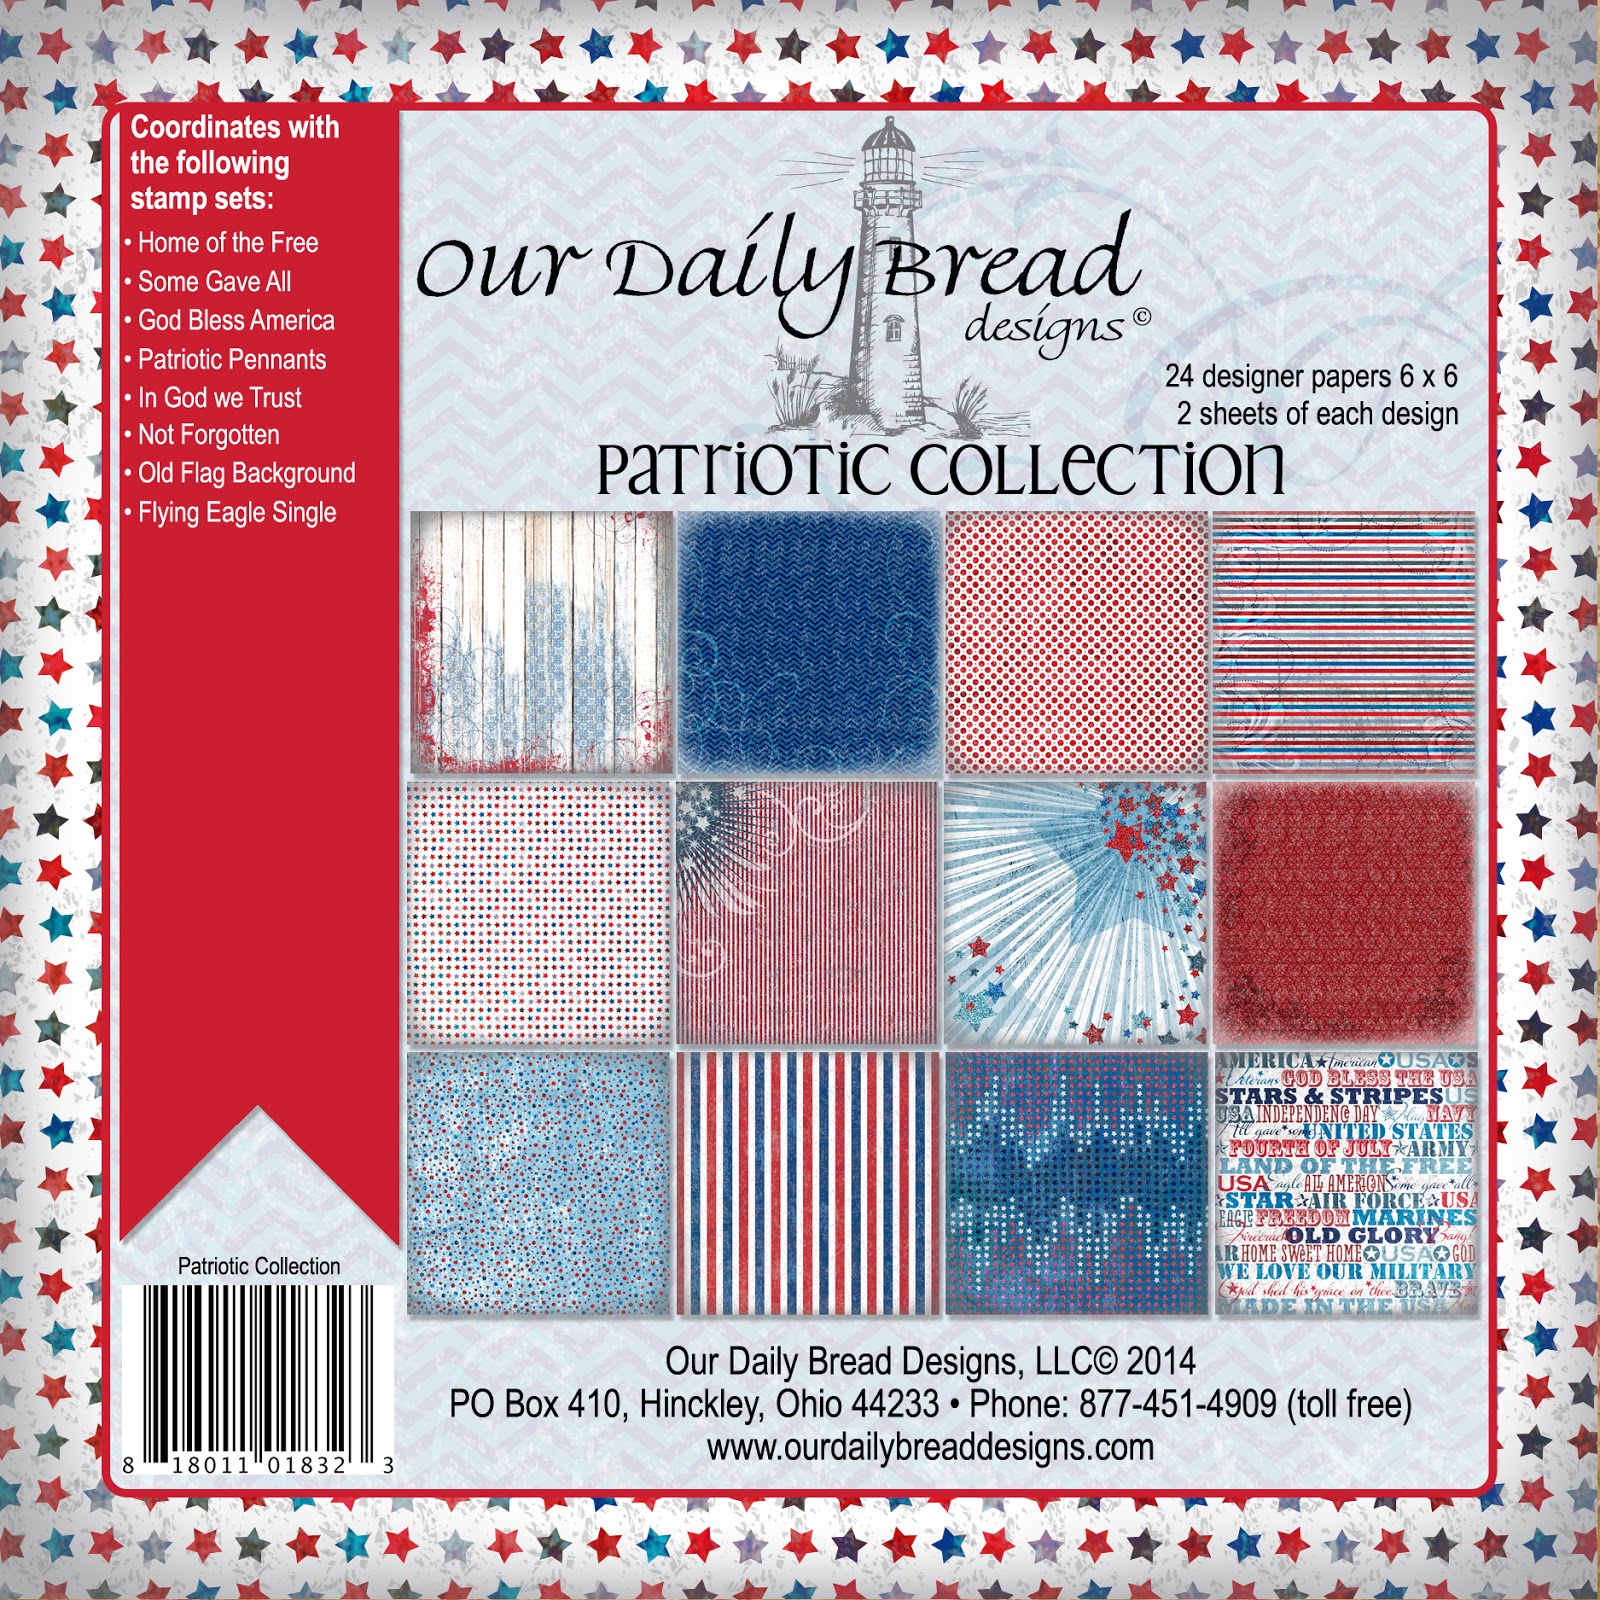 https://www.ourdailybreaddesigns.com/index.php/patriotic-collection-6x6-paper-pad.html